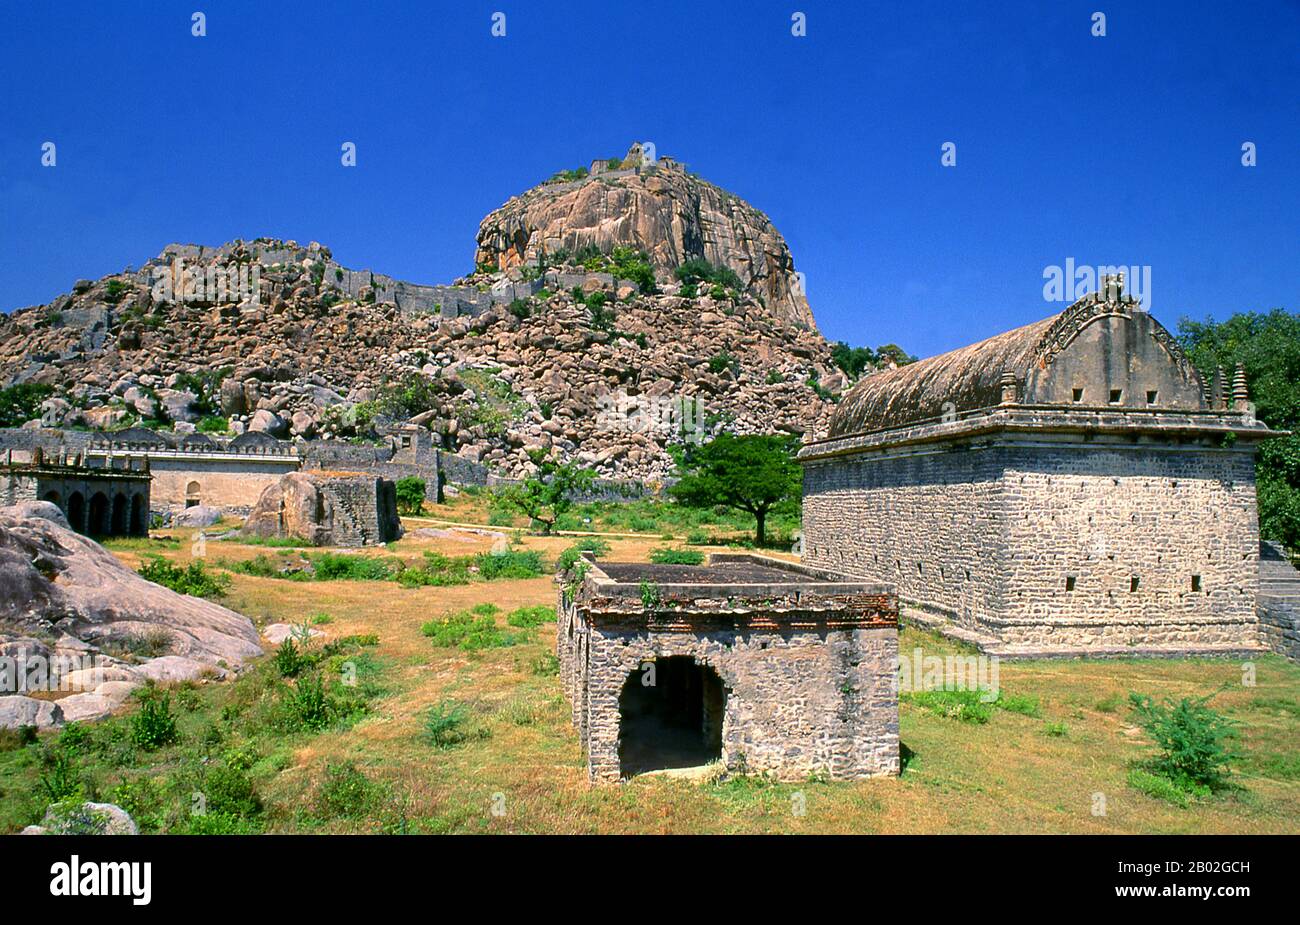 India: Gingee Fort, Tamil Nadu. Gingee Fort or Senji Fort in was originally the site of a small fort built by the Chola dynasty during the 9th century. The fort was modified by Kurumbar during the 13th century.  The fort as it stands today was built in the 15th and 16th centuries by the Nayak Dynasty. The fort passed variously to the Marathas under the leadership of Shivaji in 1677, the Bijapur sultans, the Moghuls, Carnatic Nawabs, the French and then the British in 1761. The fort is closely associated with Raja Tej Singh. Stock Photo